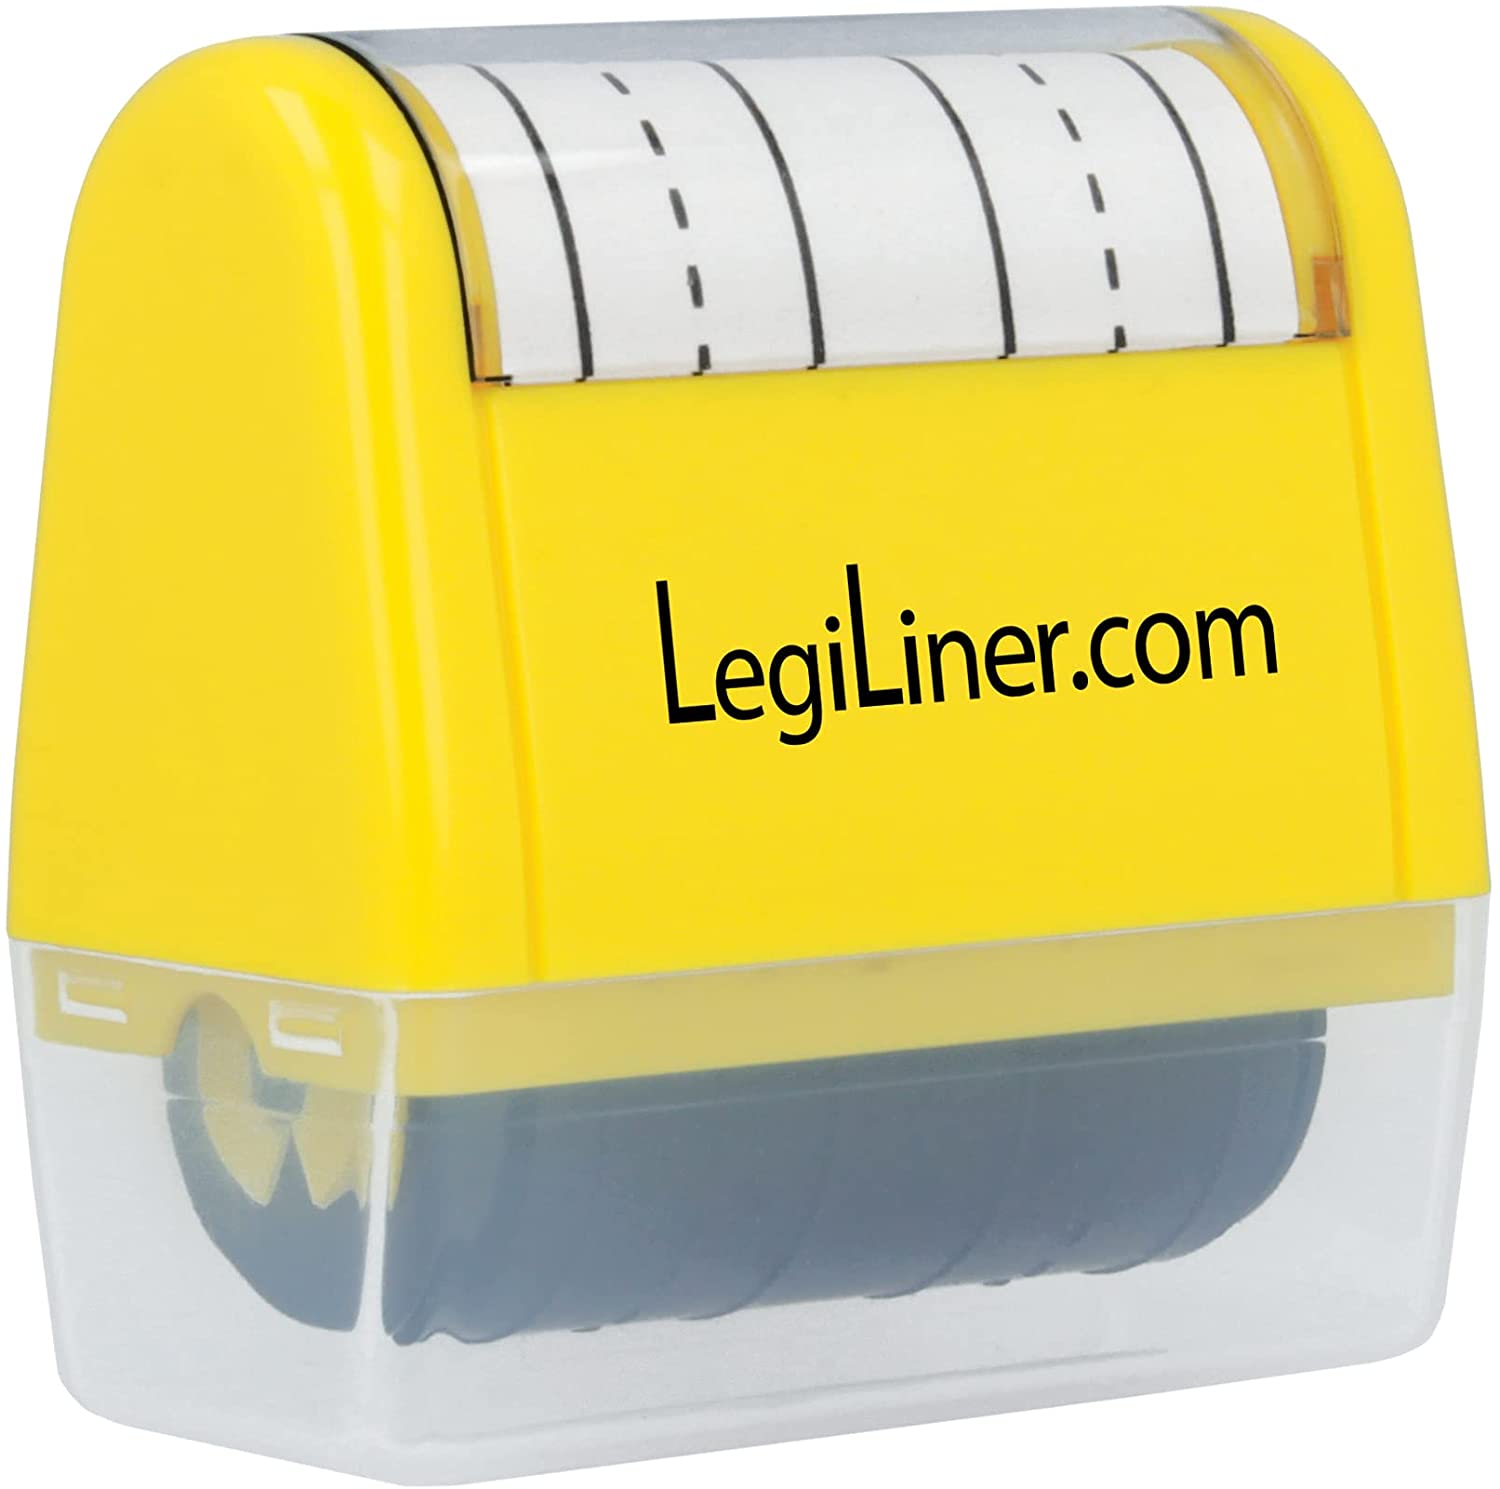 LEGILINER- 1/2″ Double Stack Dashed Handwriting Lines, Rolling, self-Inking Stamp. Handwriting Practice Tool for Teachers/OT’s